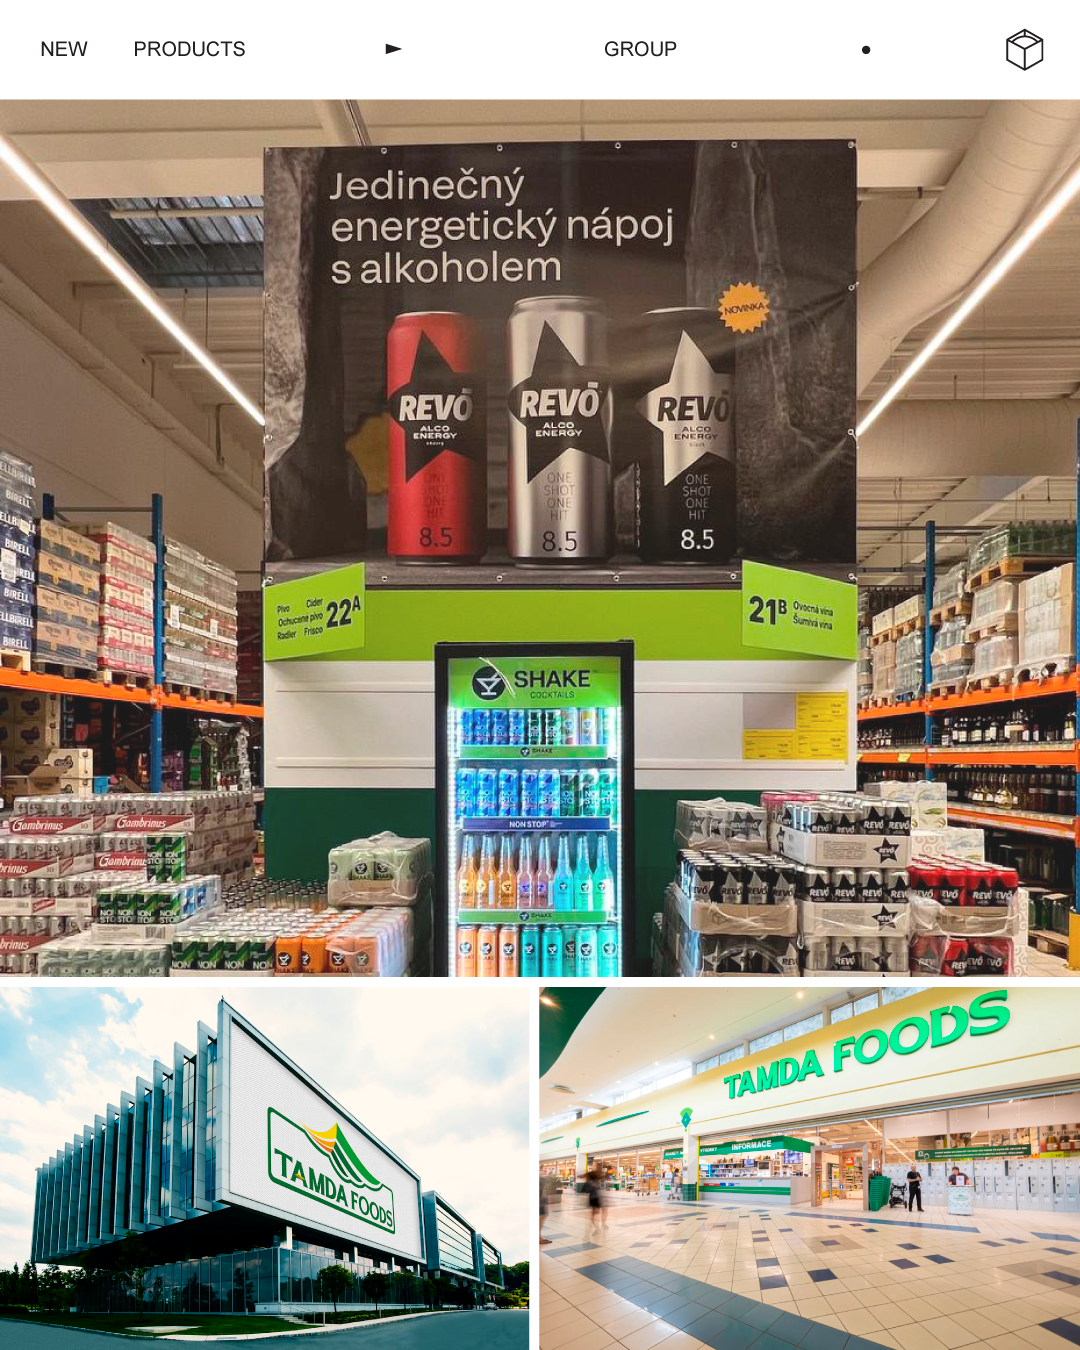 REVO and SHAKE are now available in Tamda Foods chain in the Czech Republic